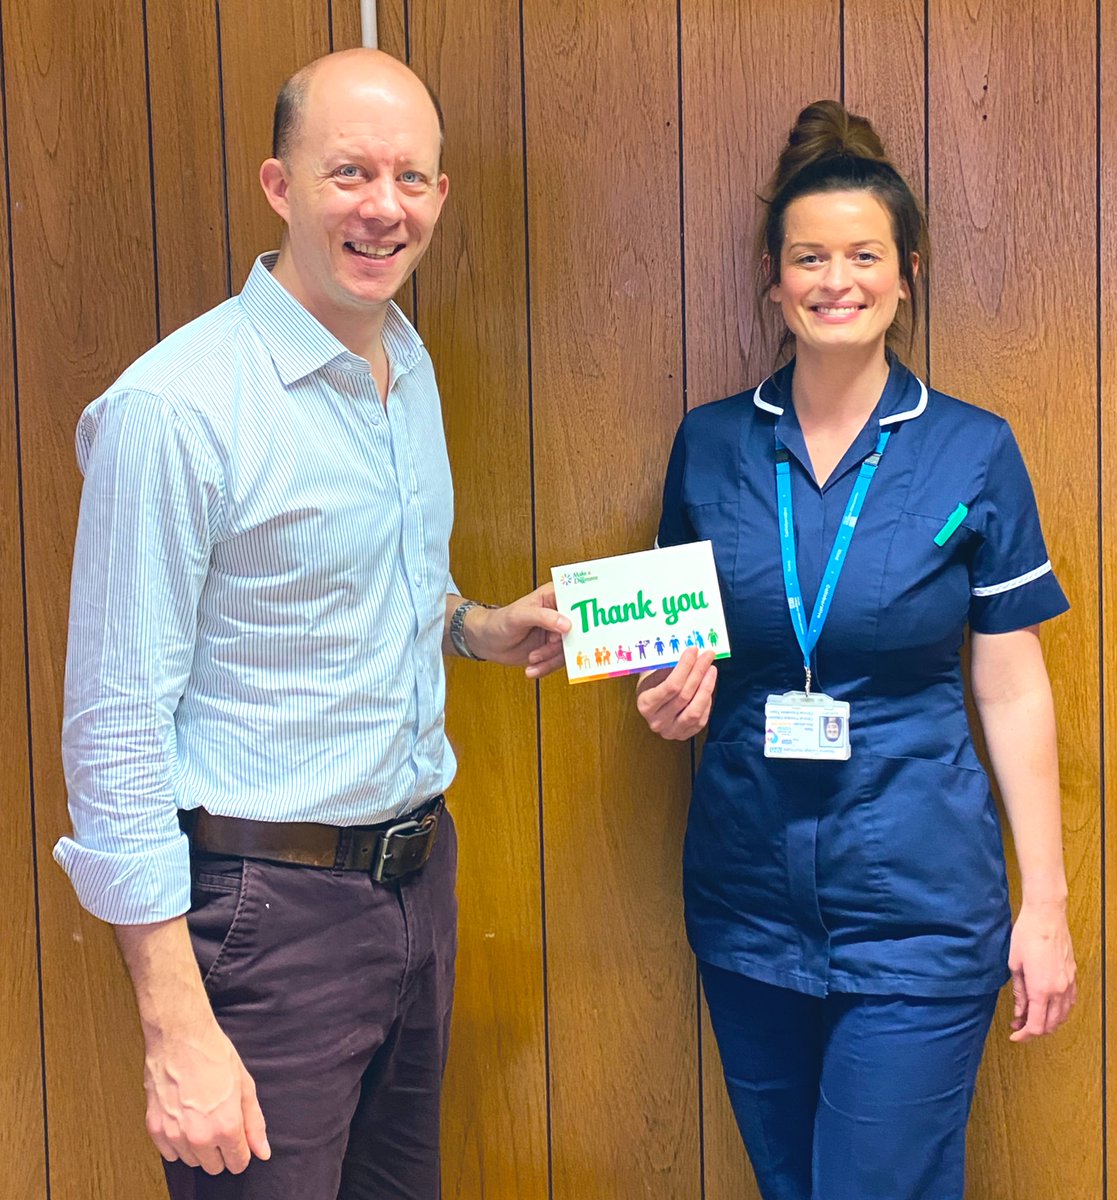 Congratulations Beth! The 1st Make a Difference Award for a member of the @imperialdigeduc in recognition of mobilising & putting together the Cerner Nursing resource on the Intranet & support given to both team peers & staff at the SMH site @SigsworthJanice @Imperialpeople